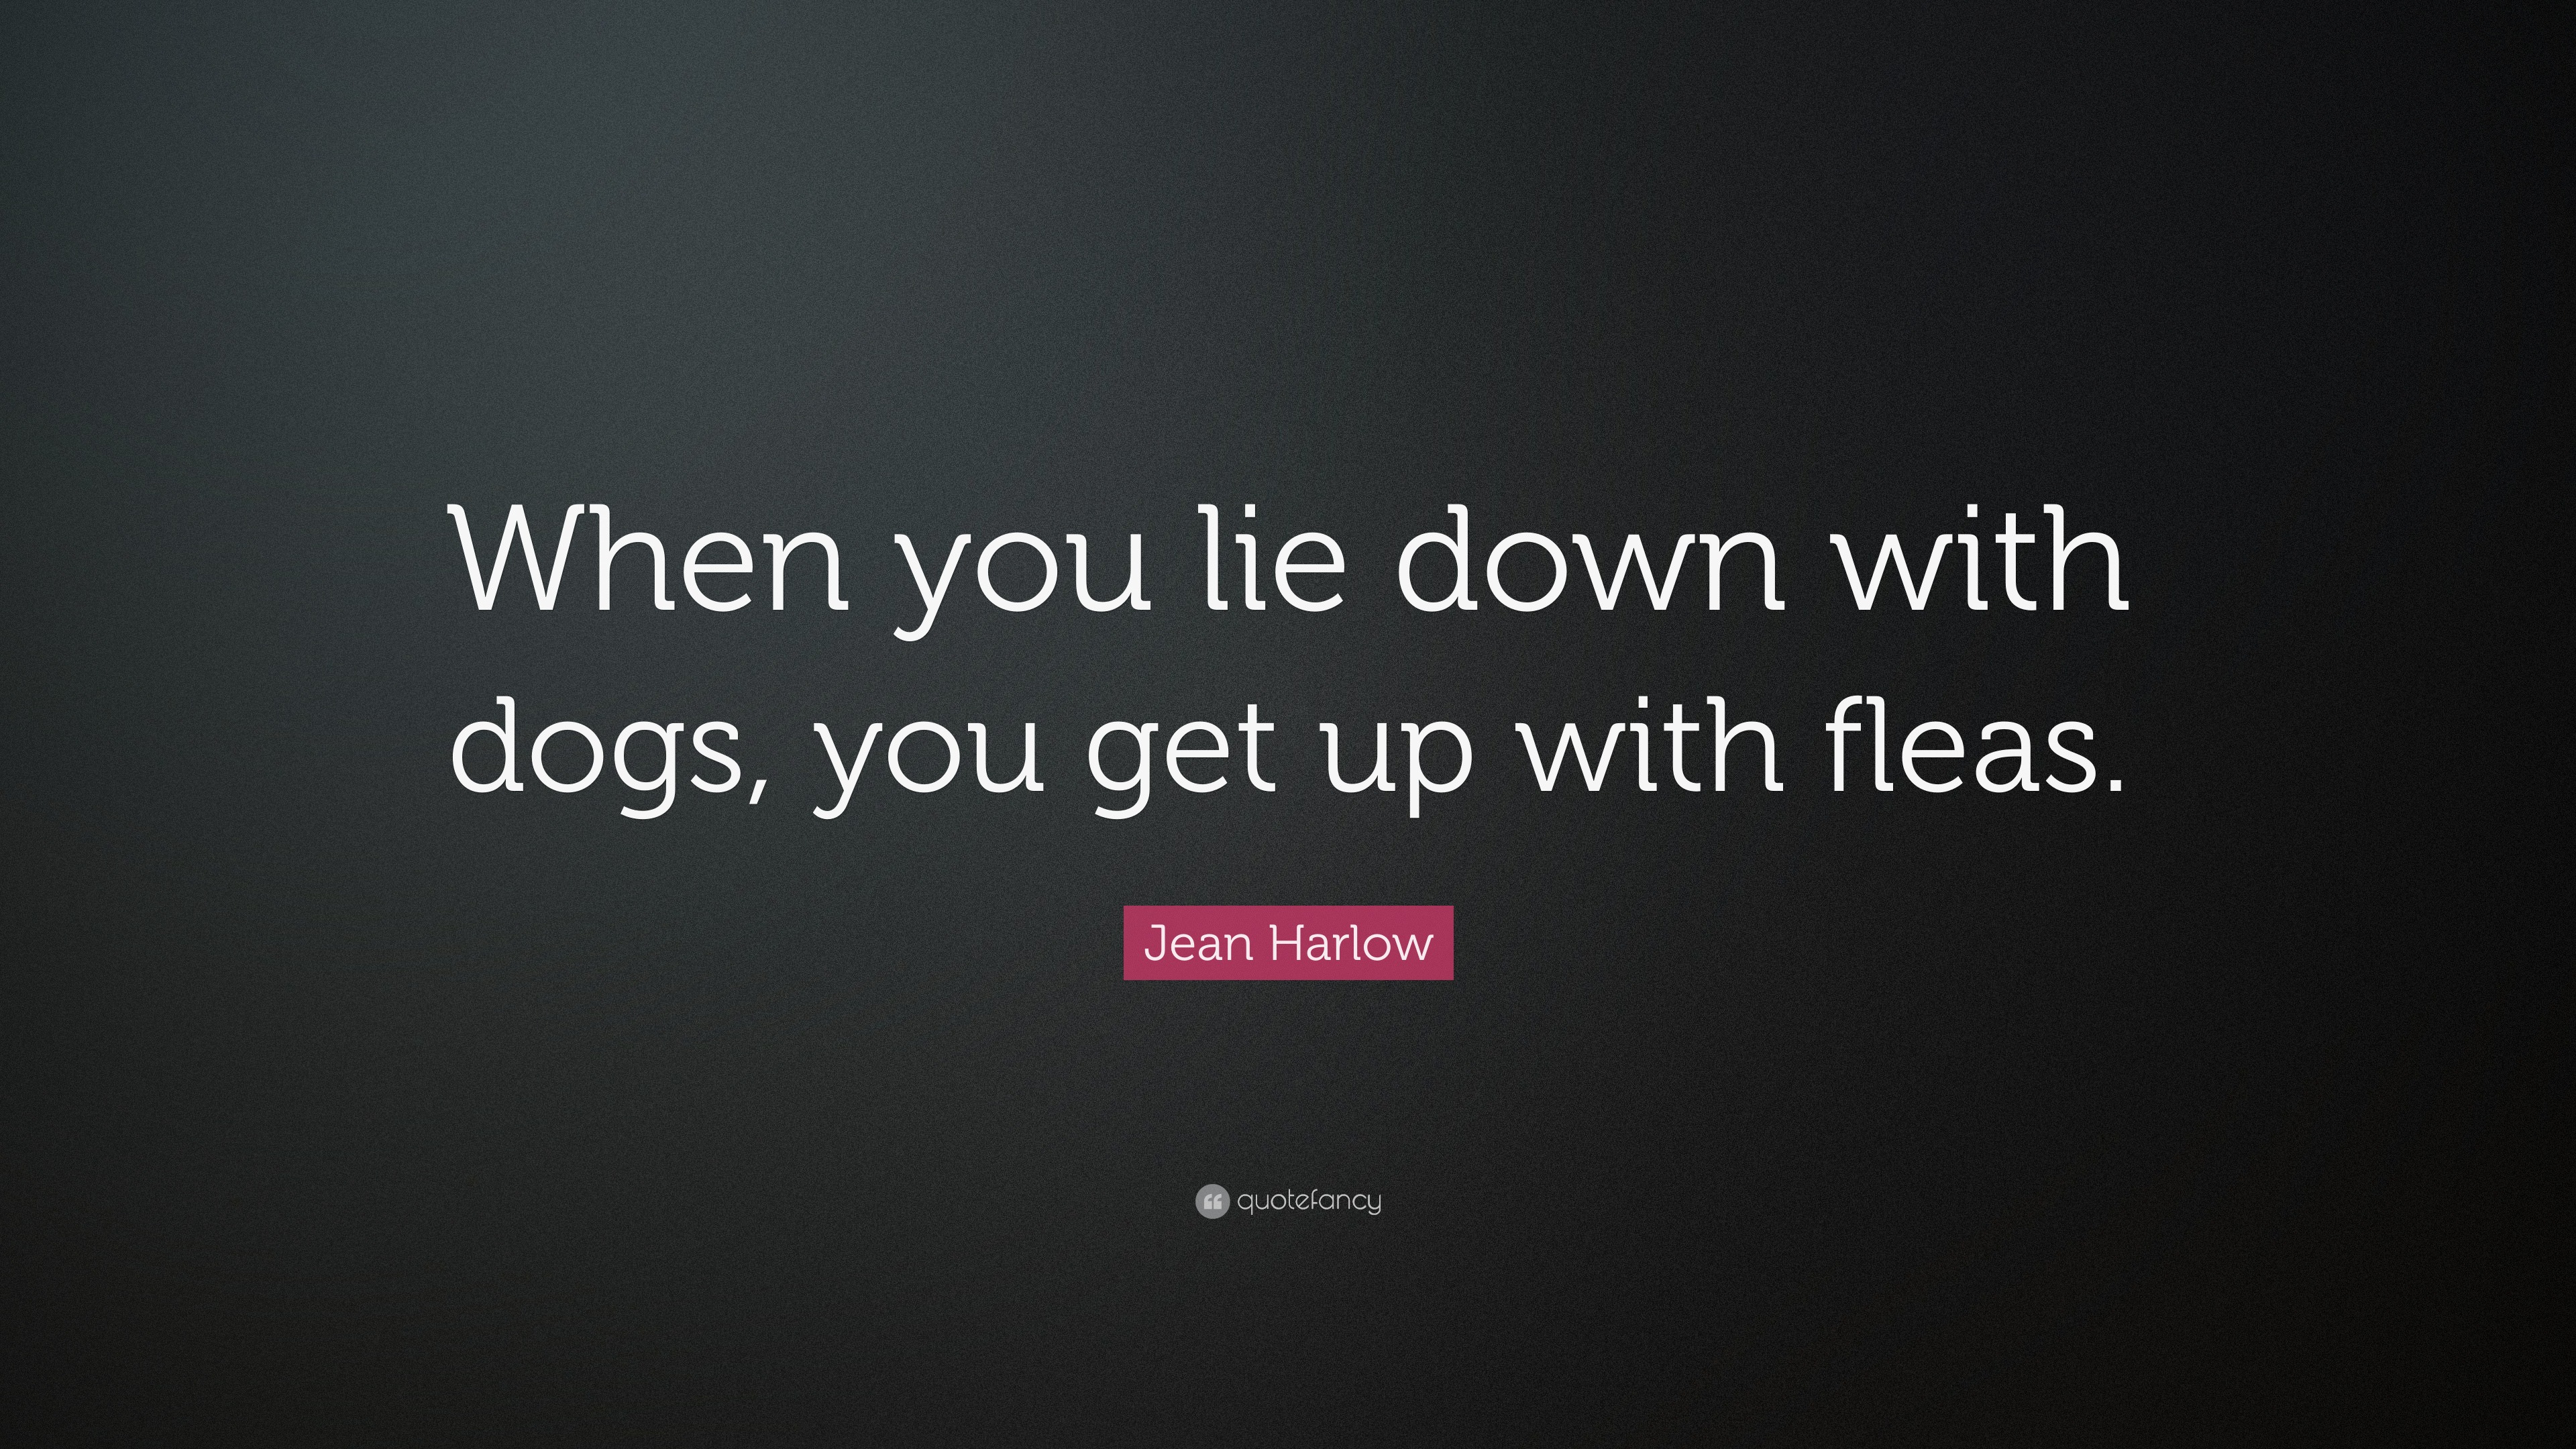 4649253-Jean-Harlow-Quote-When-you-lie-down-with-dogs-you-get-up-with.jpg